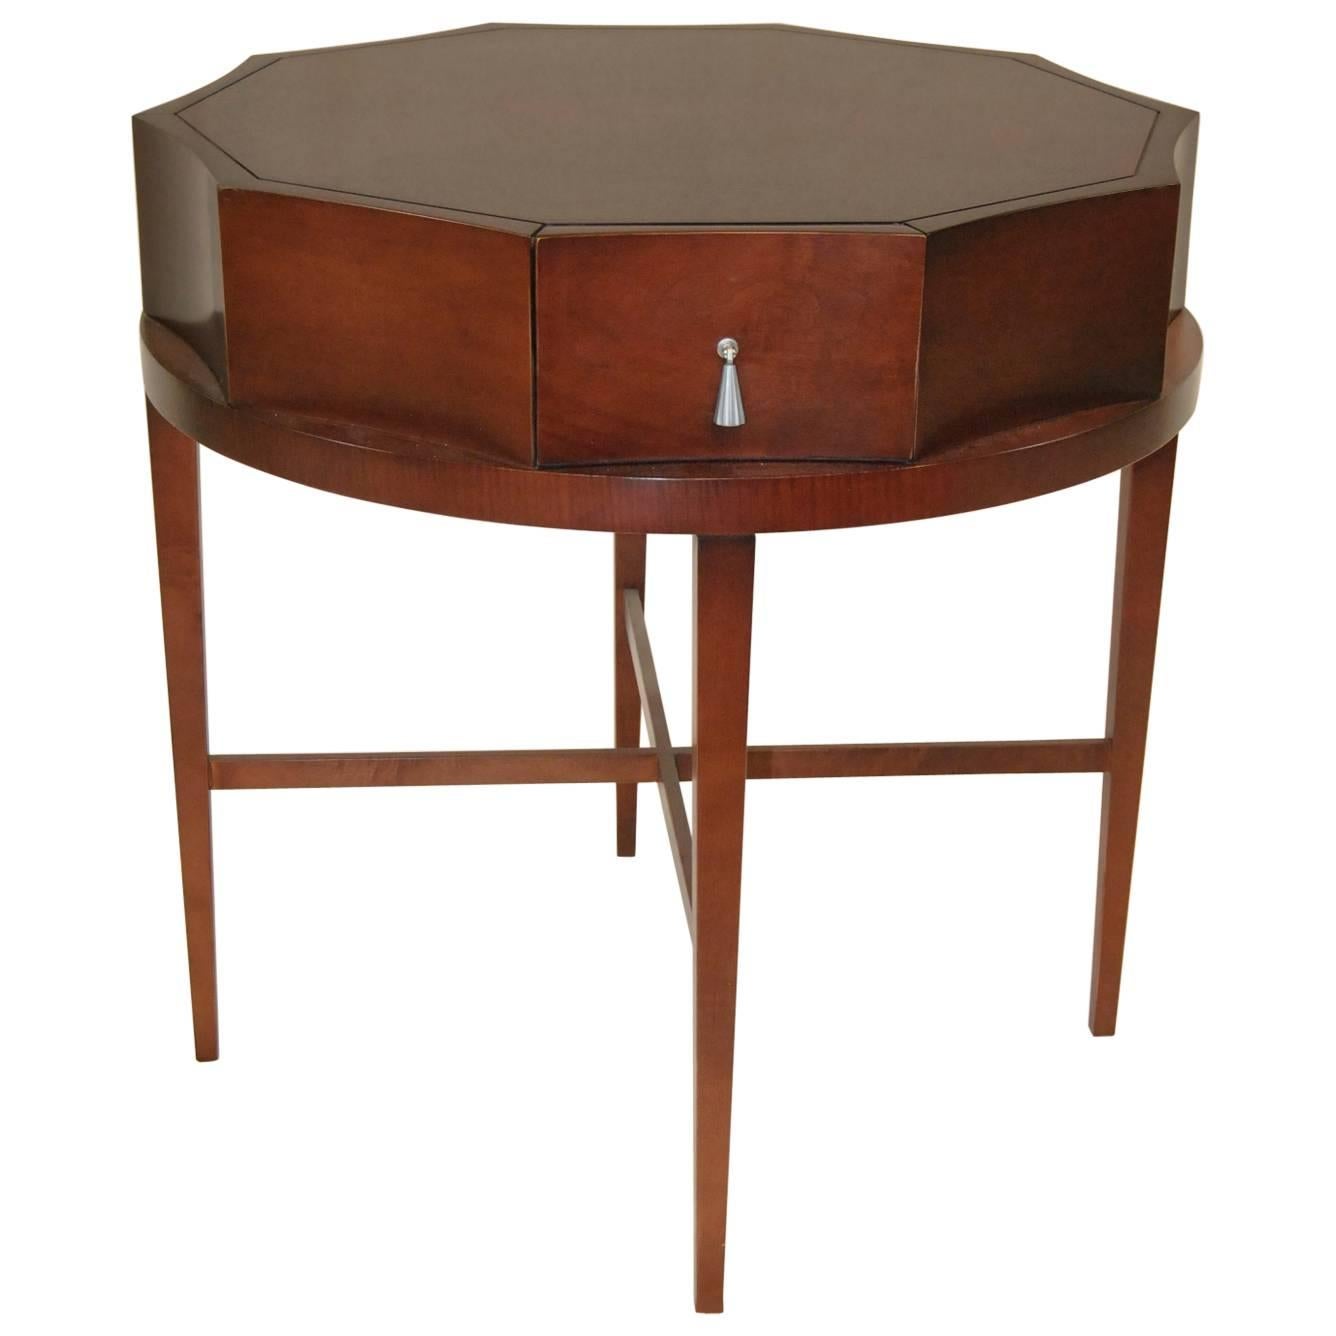 Round Mahogany Scalloped Edge Side Table by Baker Furniture